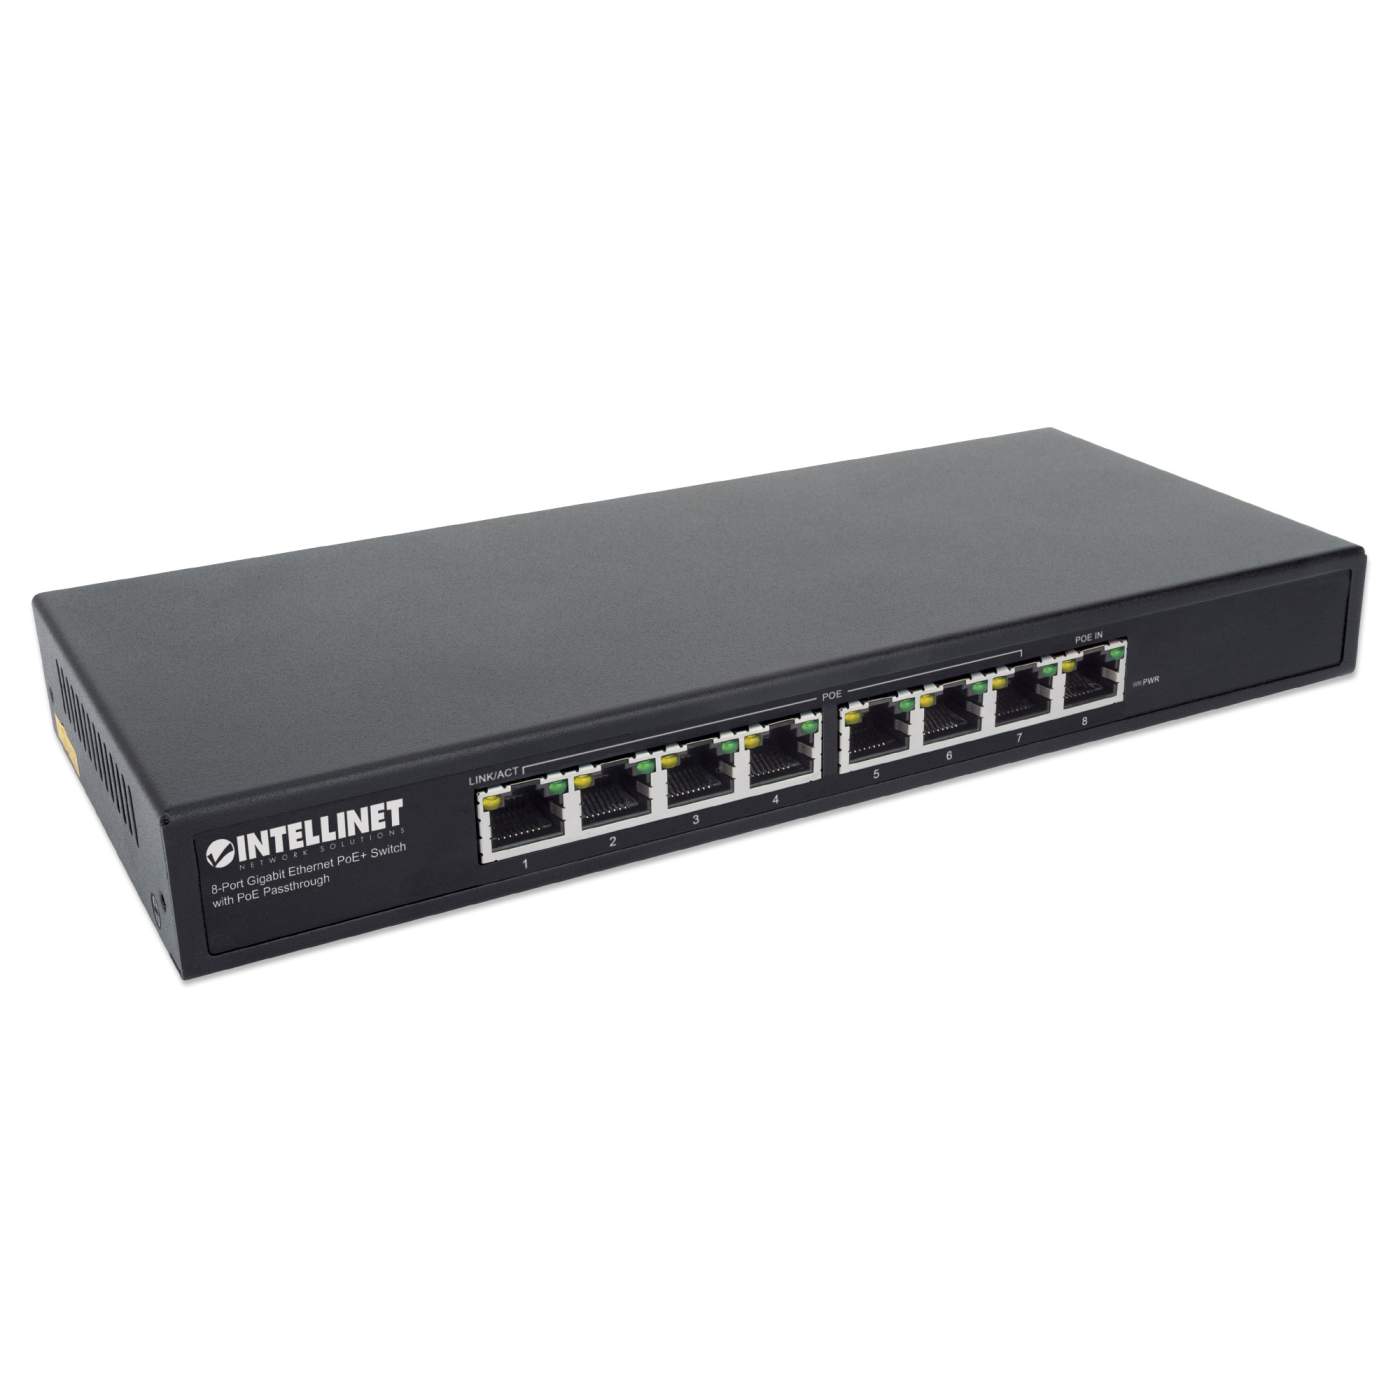 PoE-Powered 8-Port Gigabit Ethernet PoE+ Switch with PoE Passthrough Image 3